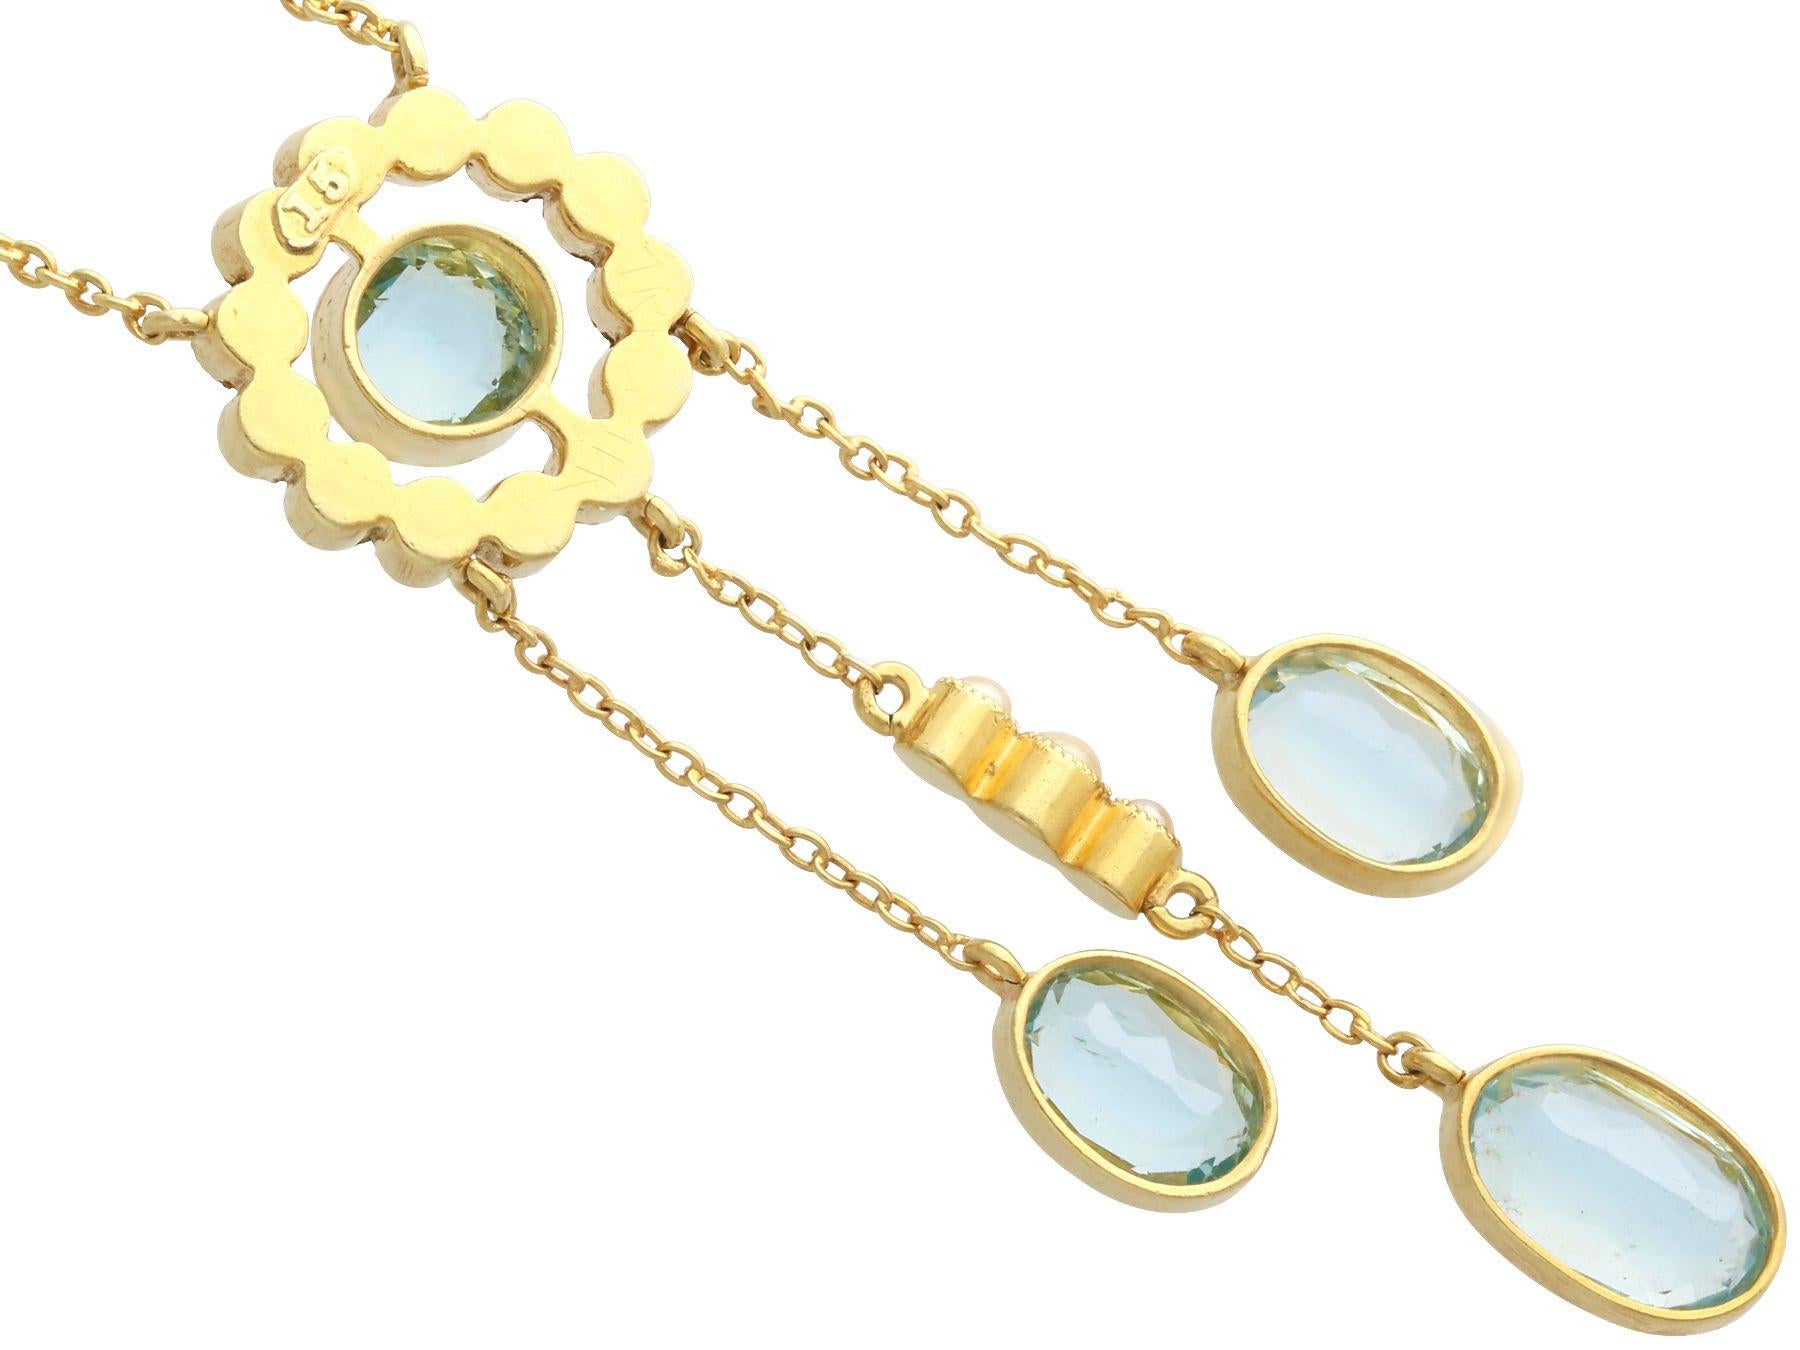 Antique 2.71 Carat Aquamarine and Pearl Yellow Gold Earring and Pendant Set For Sale 2